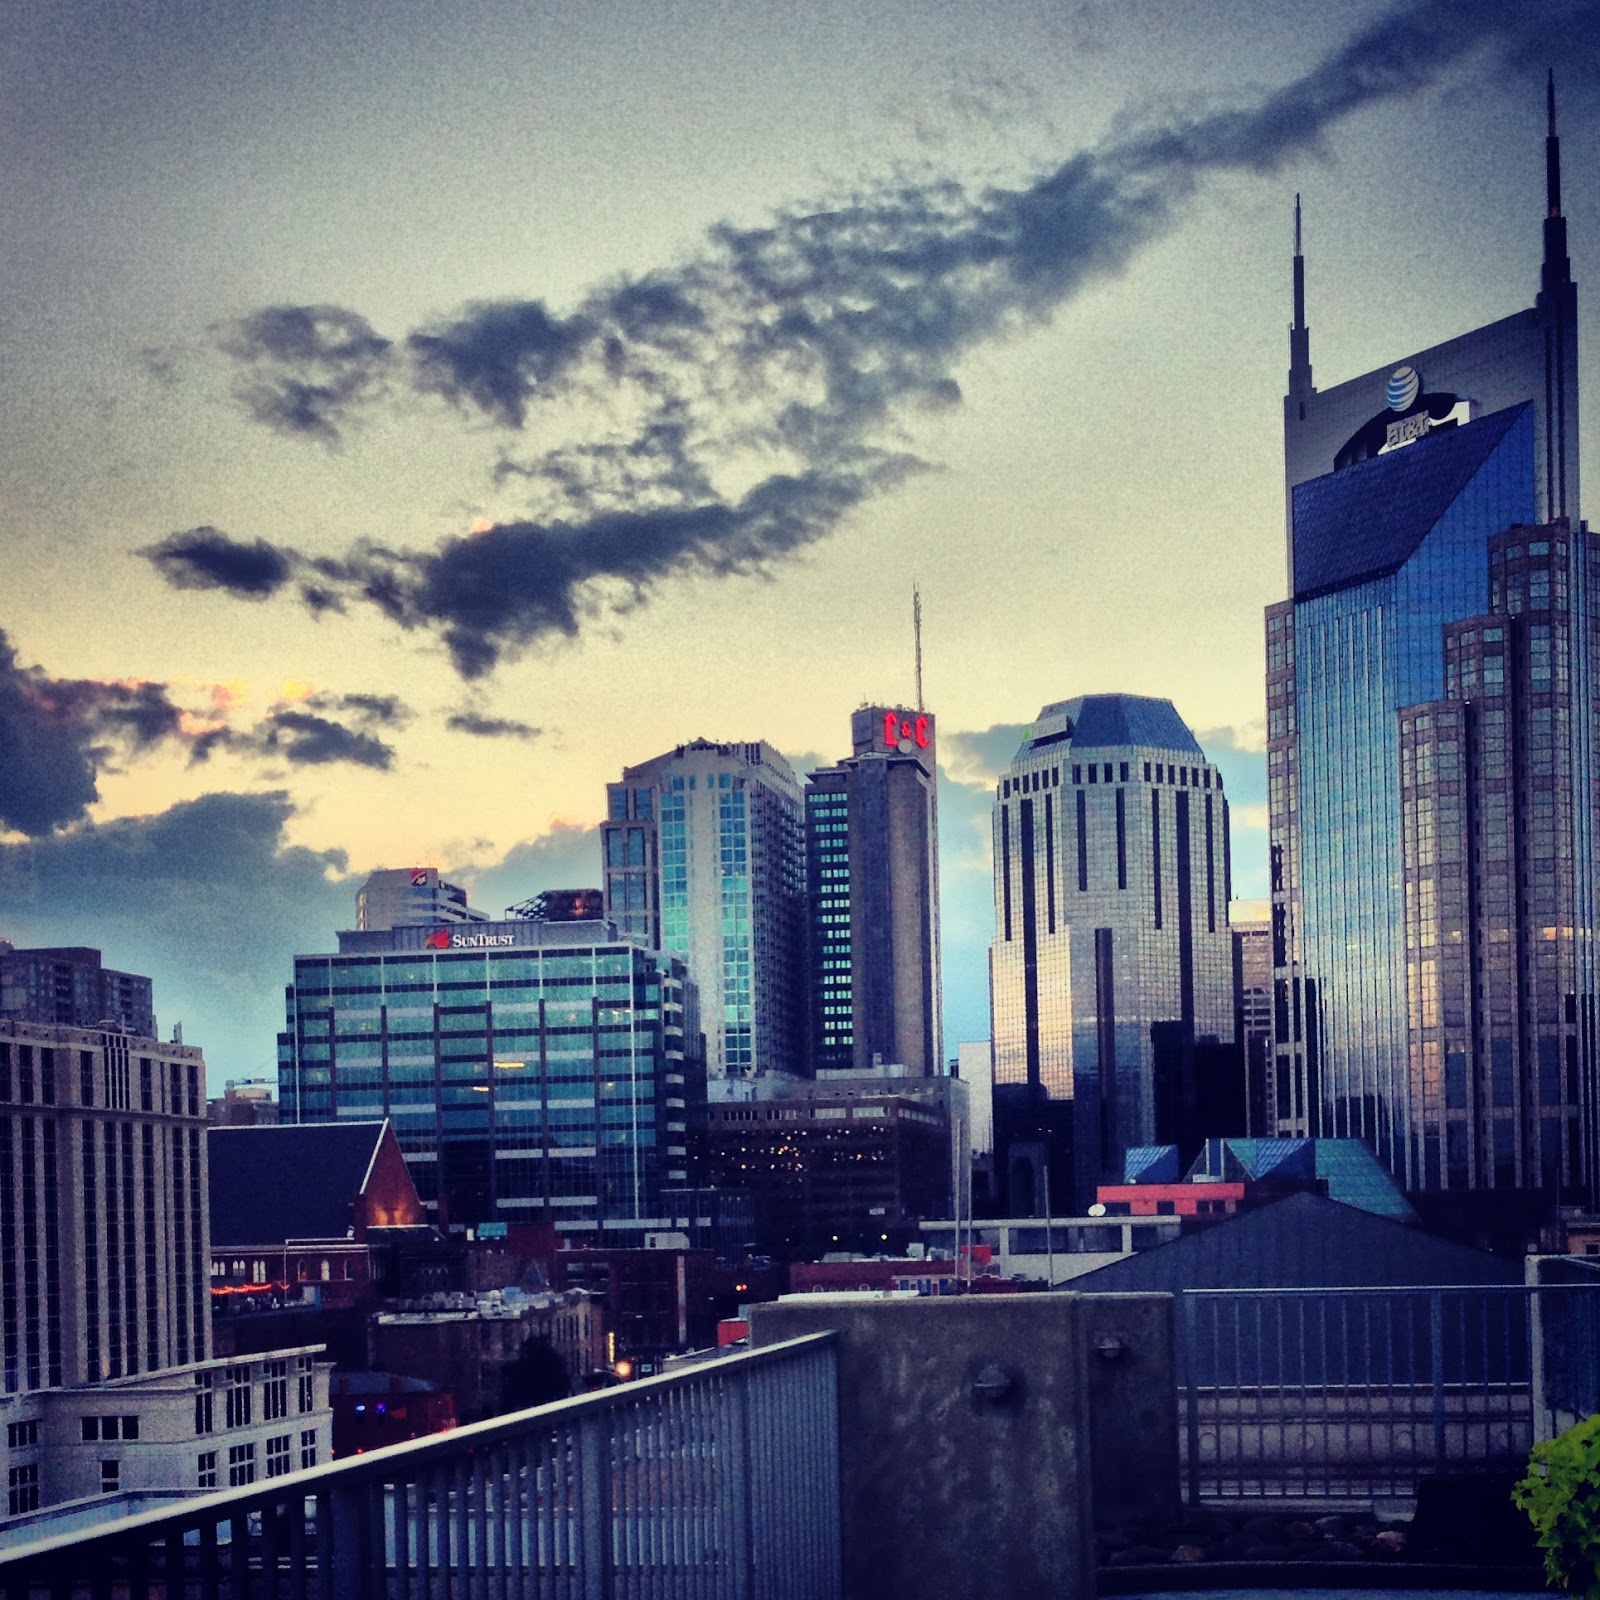 Spending a day visiting Nashville? Here's my recommended itinerary for